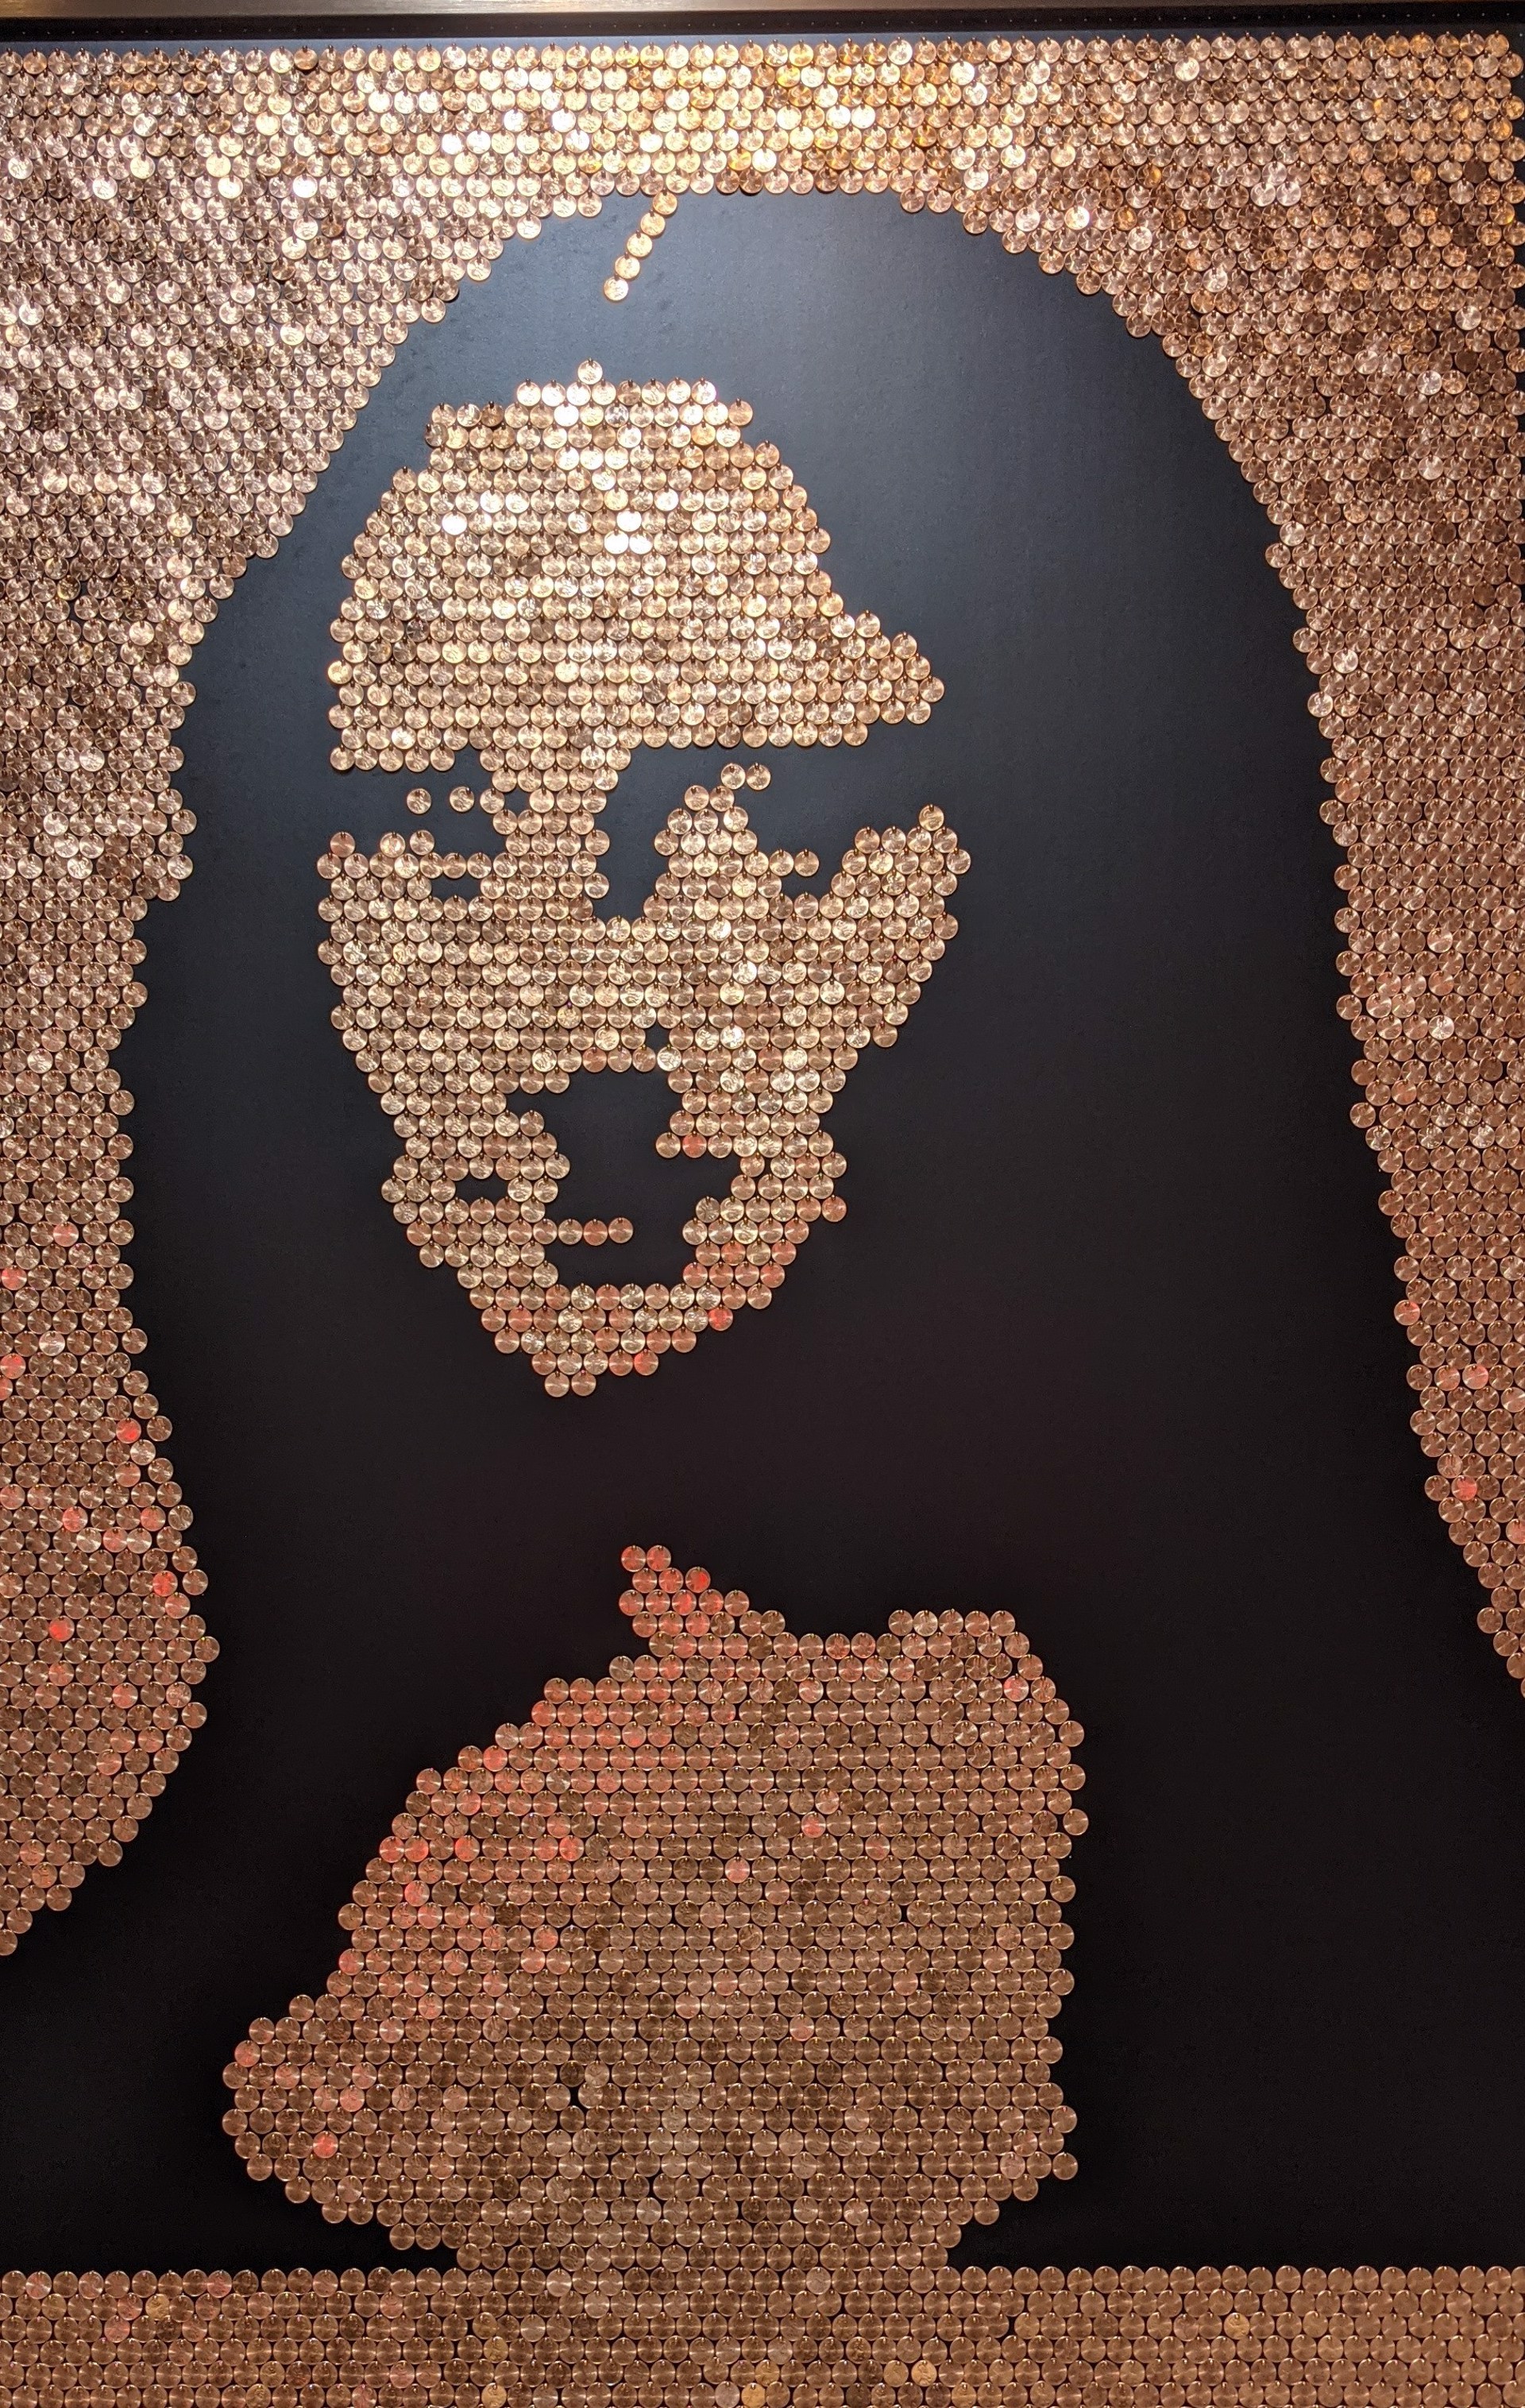 Penny Face "Mona Lisa" by "Coins & Sequins On Canvas" by Efi Mashiah